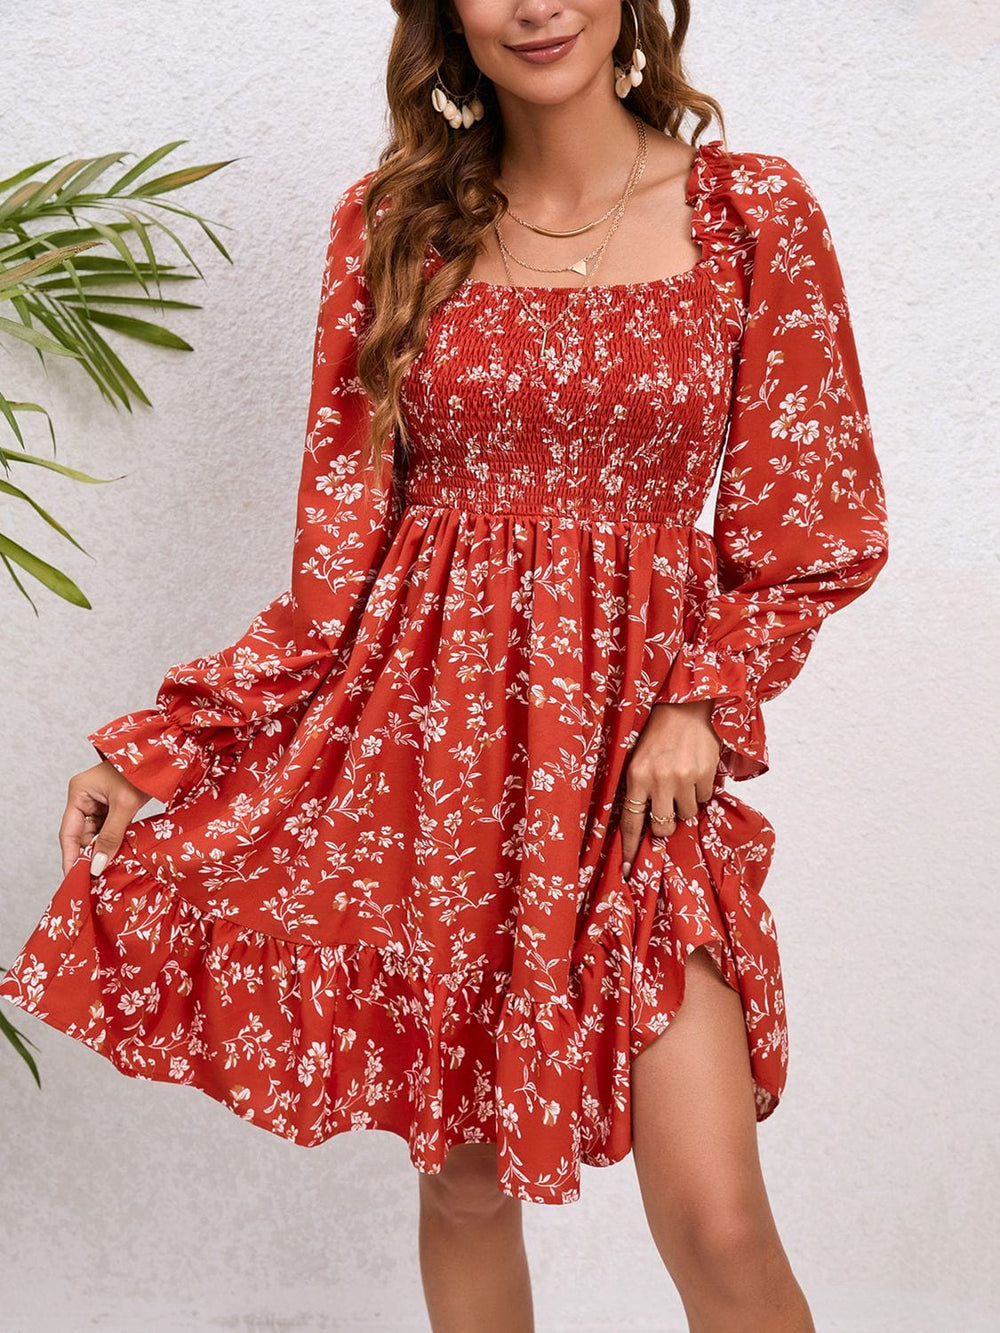 The802Gypsy Dresses Gypsy-Apple Floral Square Neck Dress